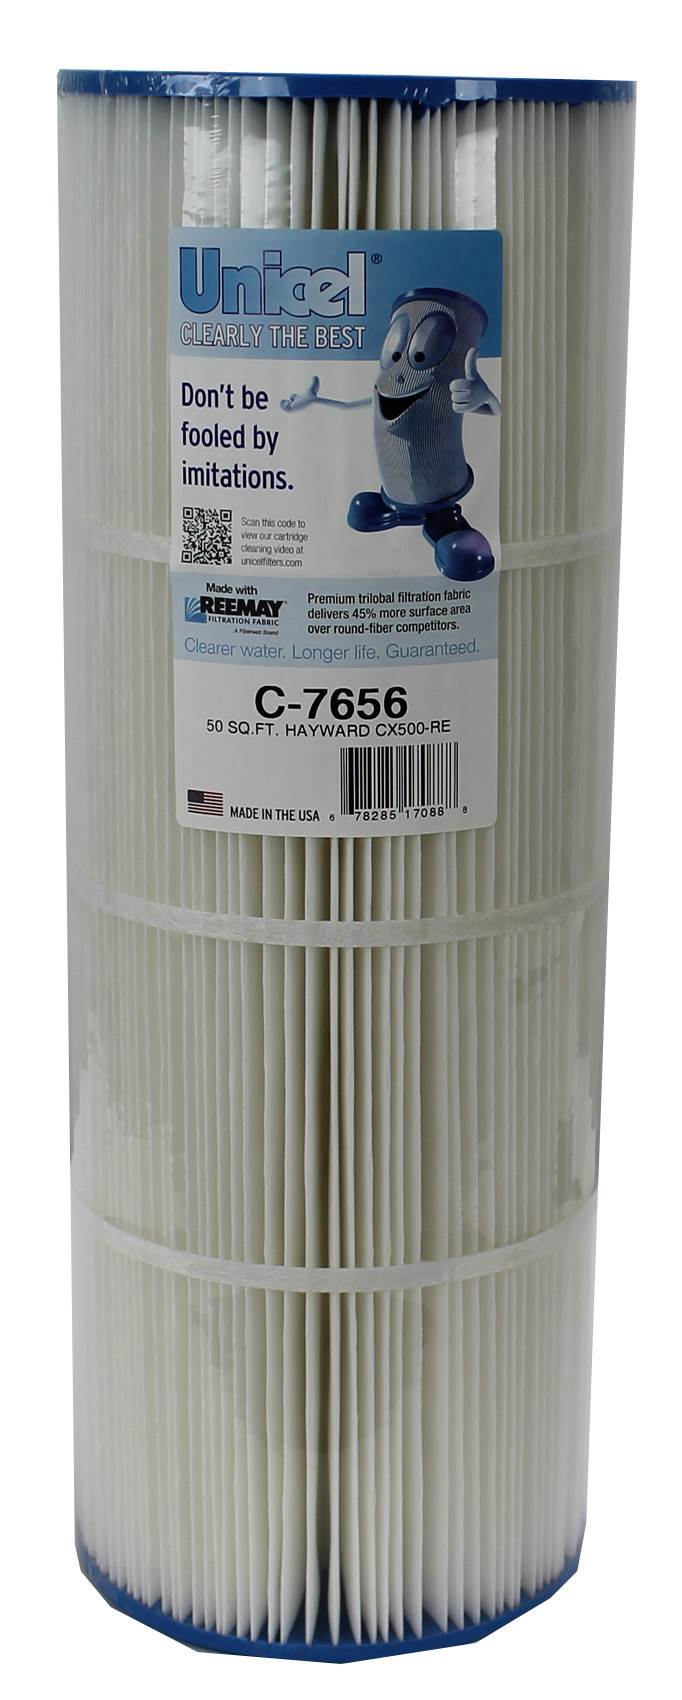 Unicel C-7656 Hayward CX500RE Star Clear Replacement Pool/Spa Filters (4 Pack)